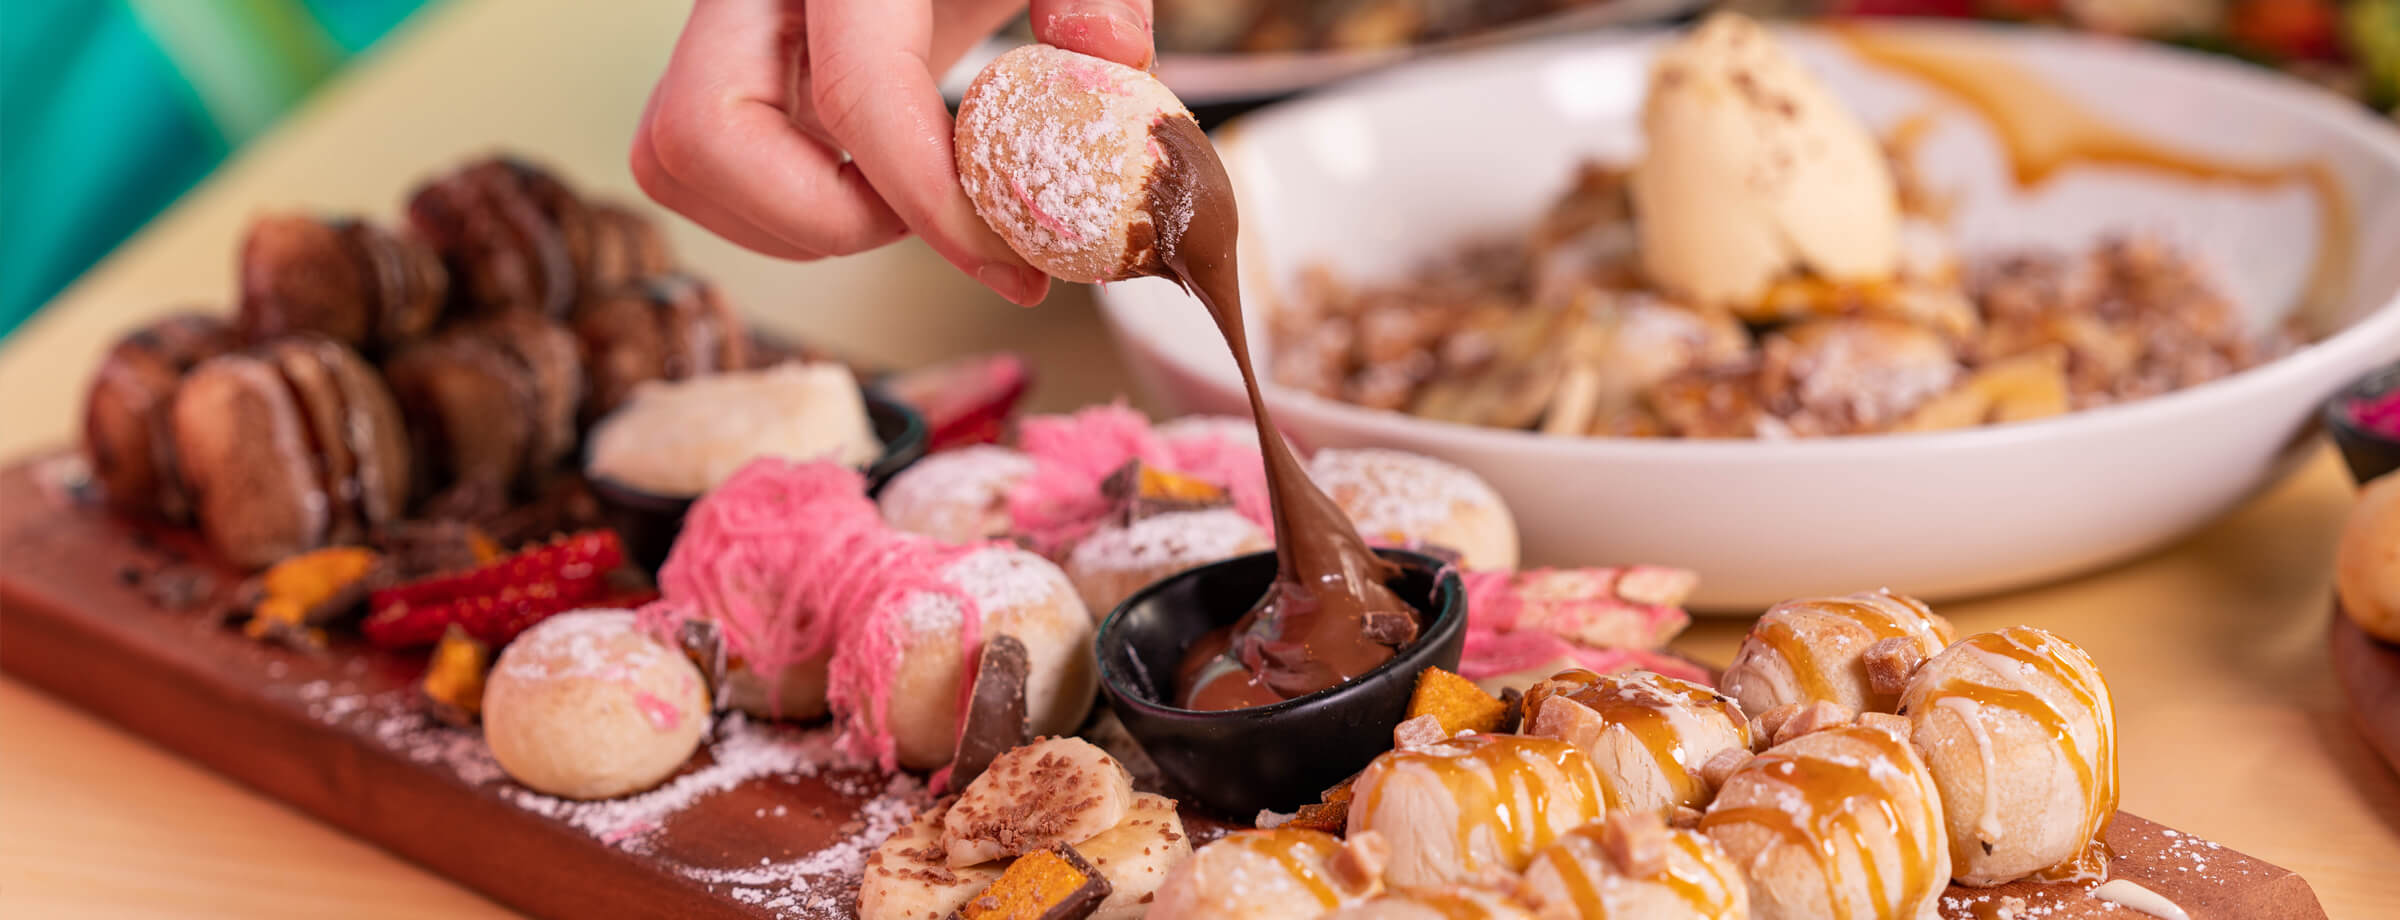 DoughBalls Pizza Restaurant Adelaide homepage image of a customer dipping into delicious Doughballs chocolate sauce.